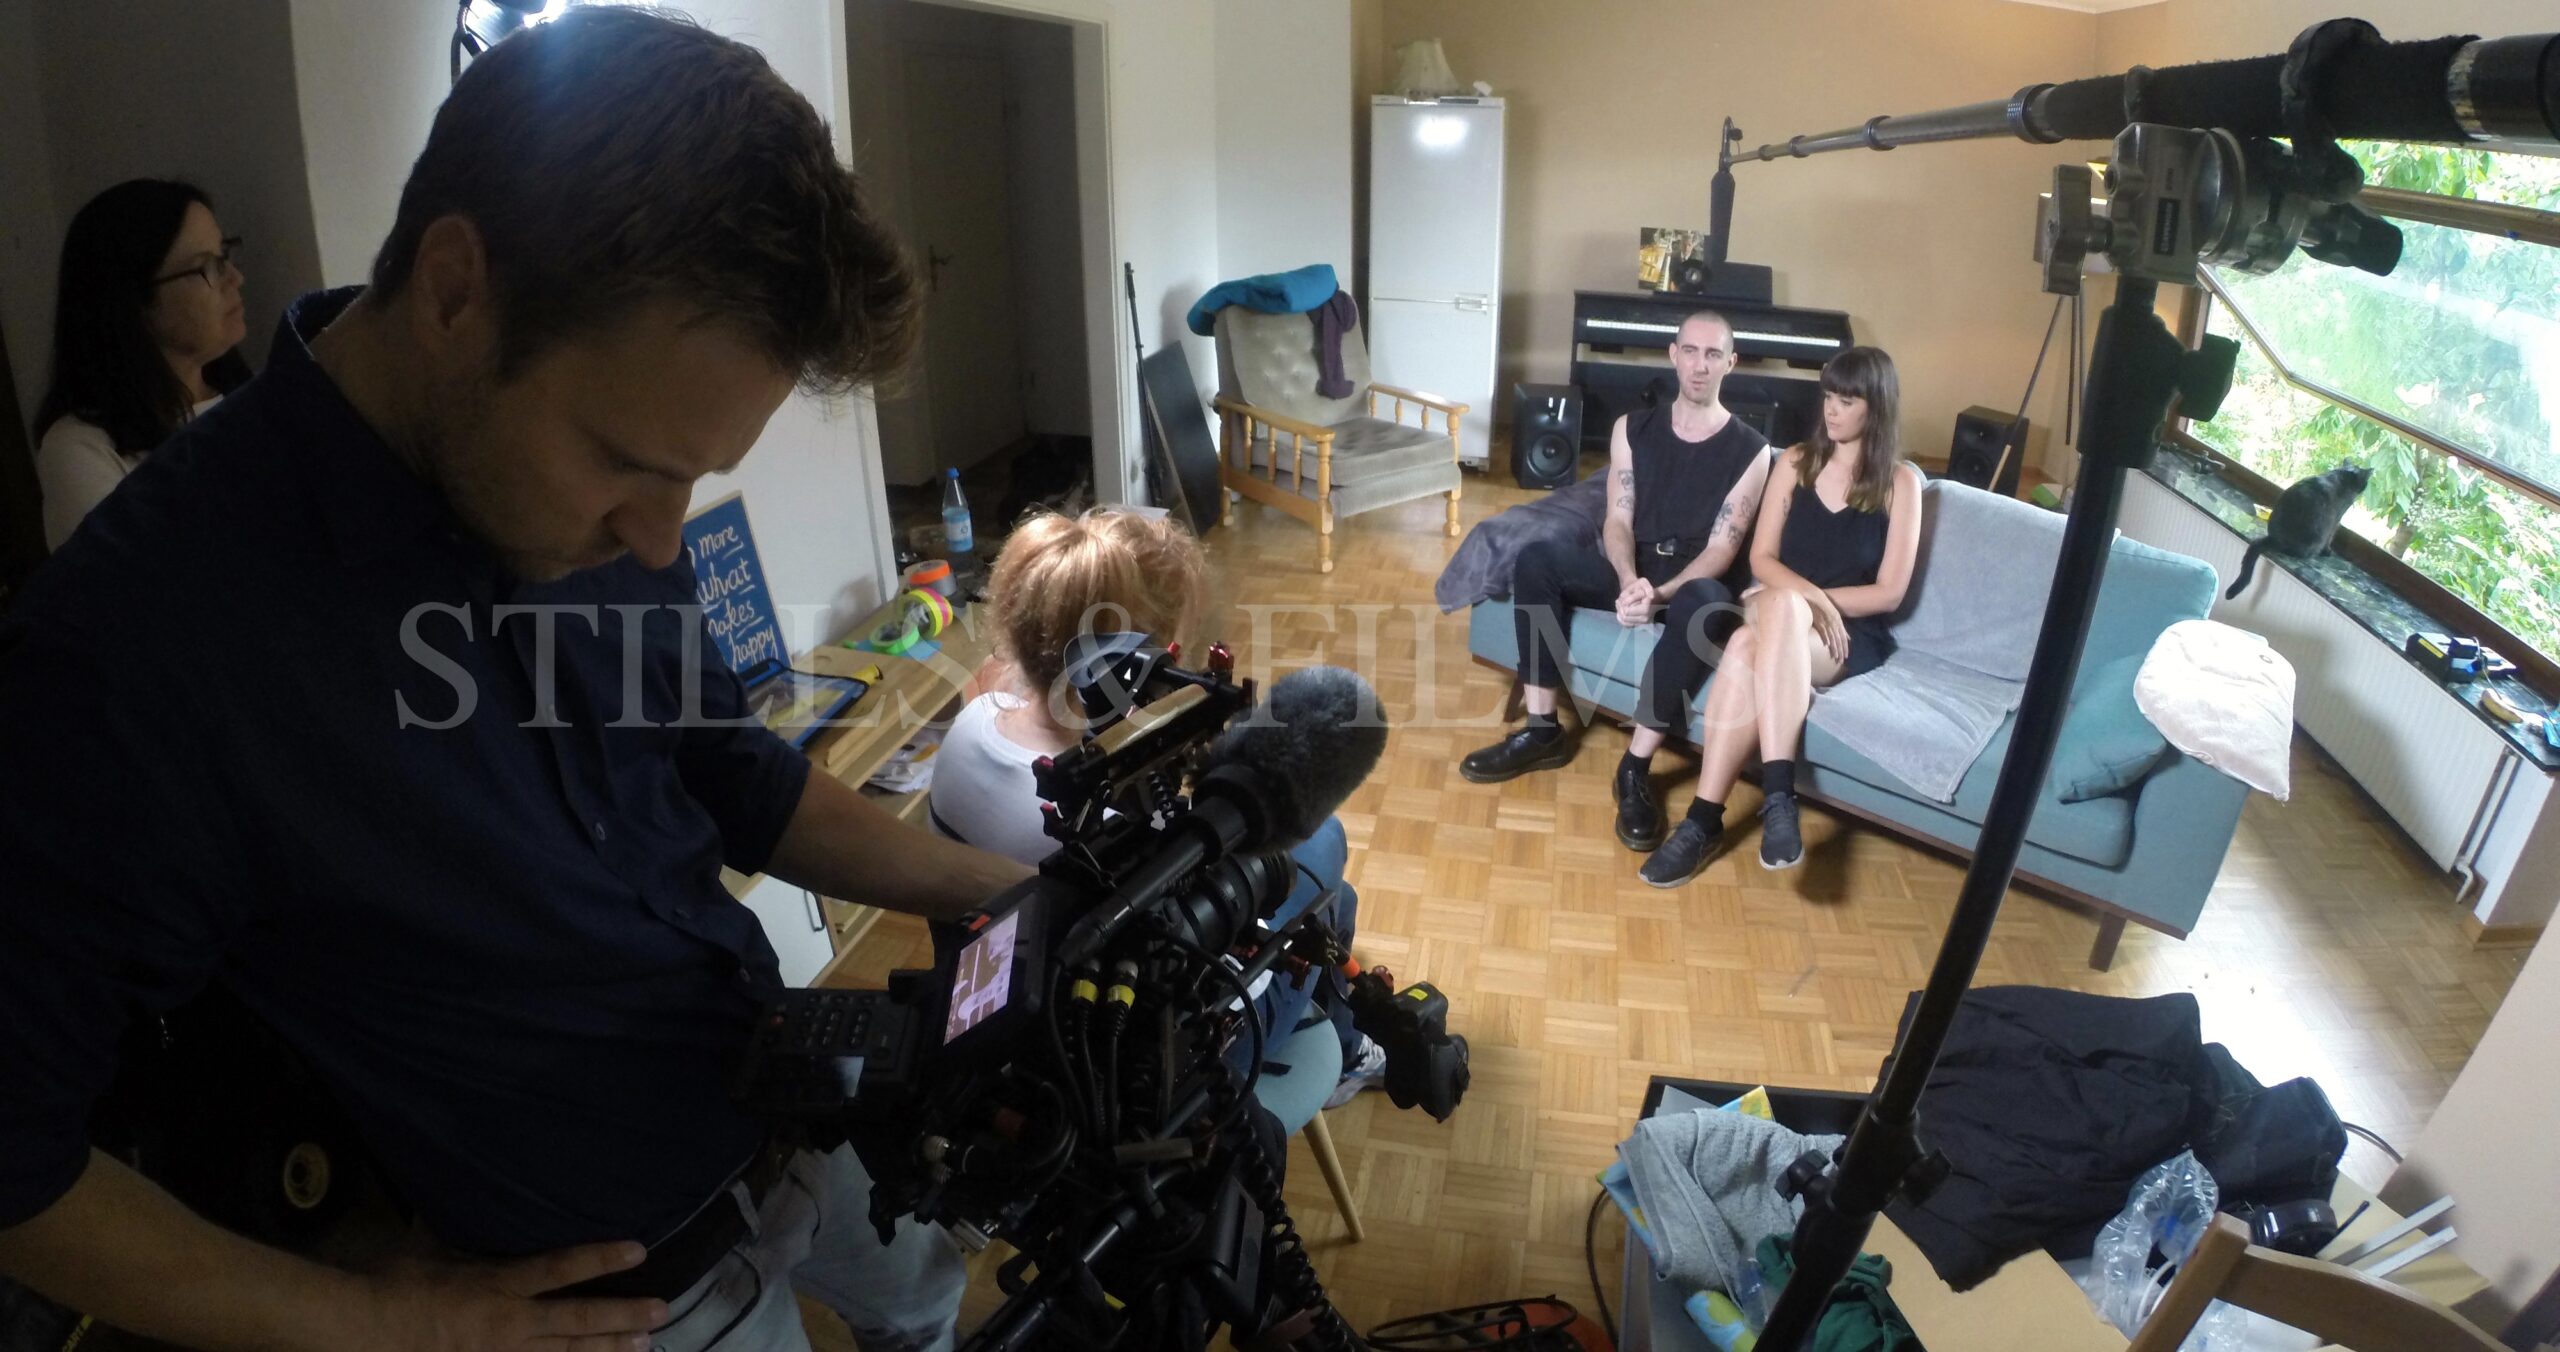 Video Crew Berlin interviews a young couple for a documentary film